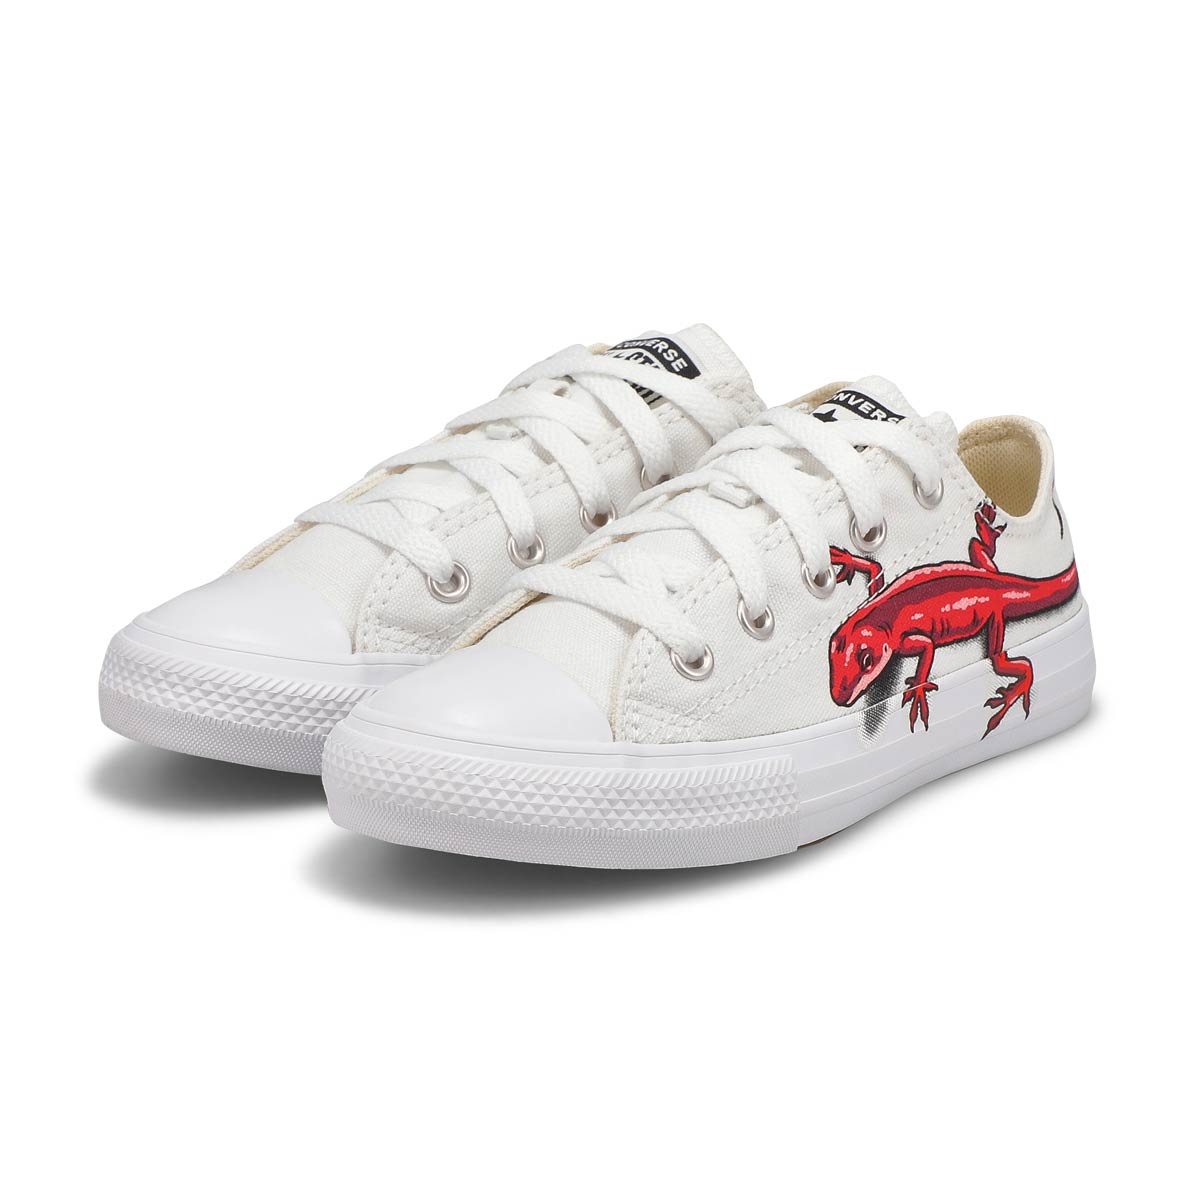 Boys' CT All Star Ox sneakers - wht/red/blk